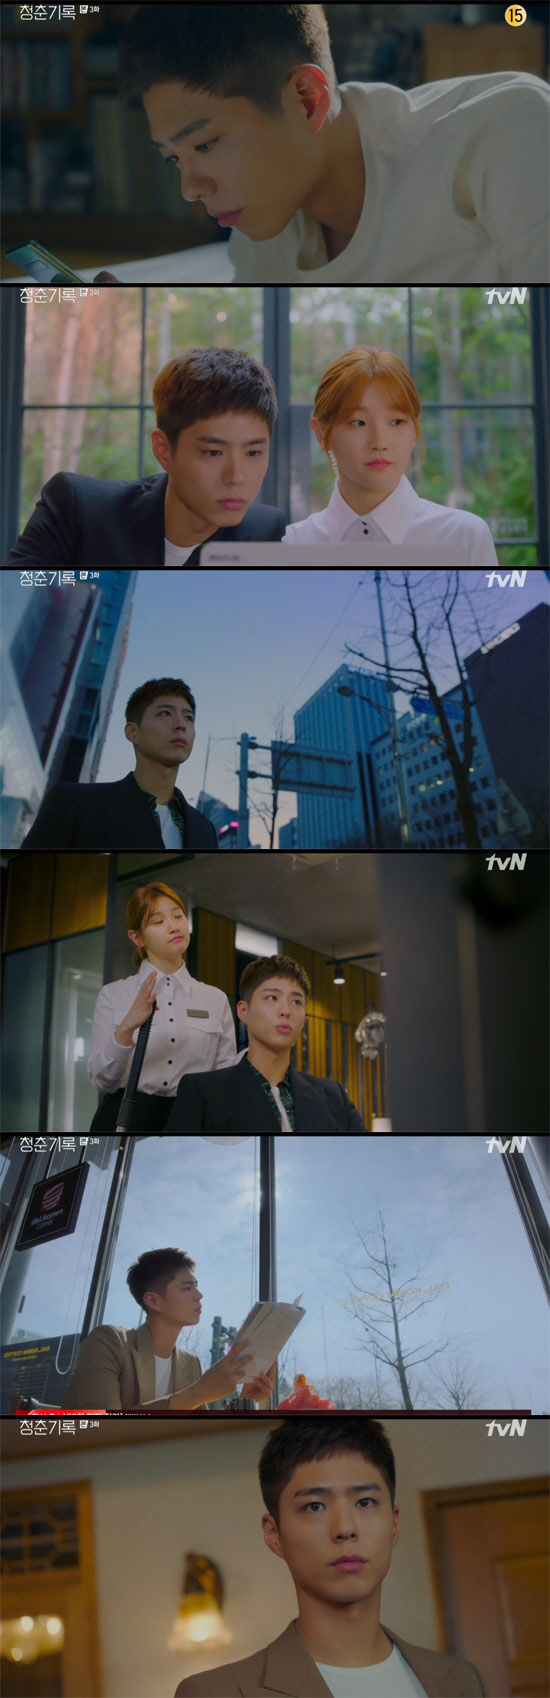 Actor Park Bo-gum decides to make film appearanceIn the TVN Monday drama Record of Youth, which aired on the 14th, Sa Hye-joon (Park Bo-gum) once again decided to join the military and decided to appear in the movie.Park Bo-gum had learned that he had taken a picture with the help of Won Hae-hyo (Byeon Woo-seok). So, Sa Hye-joon said, I know you are trying for me.But today, something is coming from inside. You did nothing wrong. Its my problem. I can not digest. I have a great self-esteem.The Milan fashion show also caused a huge wave for its first-time manager, Lee Min-jae (Shin Dong-mi).He sold his business card as a manager of Sa Hye-joon. He found out that Sa Hye-joon was pushed out of recognition rather than ability.I am not in the ability, but I am pushed out of recognition. I think I have found something I like over my age of 40.However, Sa Hye-joon, who said, Recognition is also good, refused Lee Min-jaes hand.Sa Hye-joon, who was depressed, was comforted by meeting with Park So-dam.While drinking coffee together, a video call was made to Sam Min-ki (Han Jin-hee), and Sa Hye-joon introduced Ahn Jeong-ha as Friend.To show Ahn Jung-ha, who praises the appearance of Samingi, the two people attached to him to show his grandfathers past photos and created a strange atmosphere.When I came out of the cafe, it rained, and Sa Hye-joon bought an umbrella for stability. Ive loved you twice. Im comfortable.I will call you when your brother rains, he said. I am not alone when it rains. He put his scarf around the neck of the stable and made the stable more intense.Han Ae-sook (Ha Hee-ra) expressed her upset at the words of Kim I-young (Shin Ae-ra), Hye-jun was my son and Hye-jun passed the movie audition.In the past, Han Ae-sook confessed to his sons work at the house of Won Hae-hyo, the friend of Sa Hye-joon, and gave his son a choice. Sa Hye-joon, who was worried, cheered on his mothers desire to say, My life and my life are different.Won Hae-hyo was made up by An Jeong-ha, who provoked An Jeong-ha who wasnt interested in him, and said, Im trying not to lose my heart to Sa Hye-joon.When reality and fantasy are mixed, it becomes a mess. I proposed a senior model to Sa Hye-joons grandfather who is looking for a stable job, but Sa Hye-joon refused, saying, This is not the case.I spent up to one second and throw a towel, said Lee Min-jae, who said, Who will remember you when you go to the army?So, Sa Hye-joon said, I can not explain, but from inside, Chimi knew what it was. He changed his mind that he thought it was a good character not to compete and compete. And An Jeong-ha has been assured that he is not a fan of his own.Shin Dong-mi delivered a script for the movie that came to Sa Hye-joon: Its a small role, but theres also an ambassador, the character is certain, but there was no further persuasion.Sa Hye-joon, who moved his mind, declared war on his father, Sa Young-nam (Park Young-soo), saying, Ive been contacted by the film company, Im going to star in the movie.